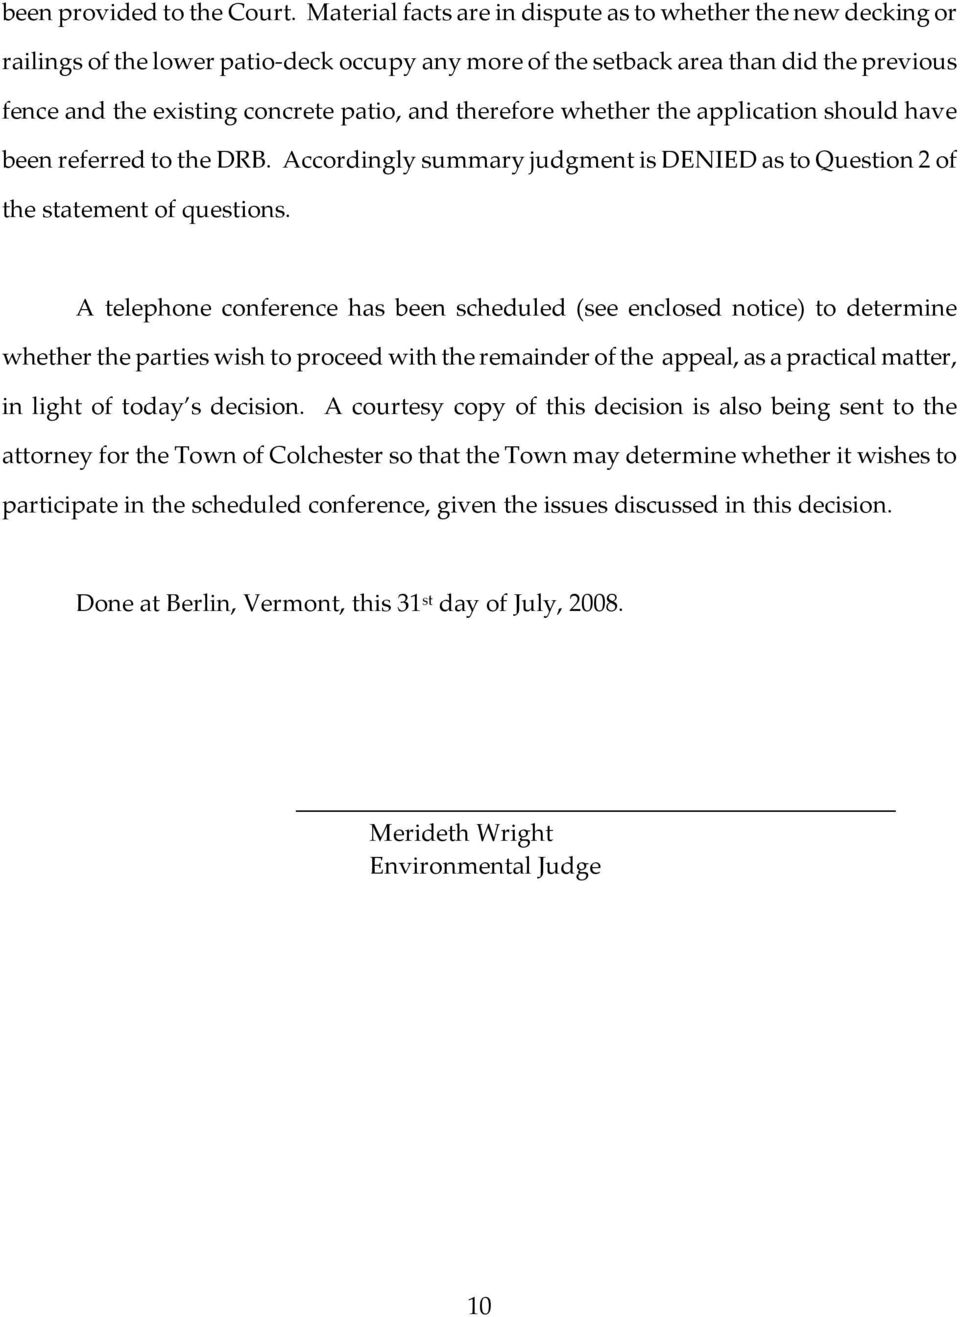 therefore whether the application should have been referred to the DRB. Accordingly summary judgment is DENIED as to Question 2 of the statement of questions.